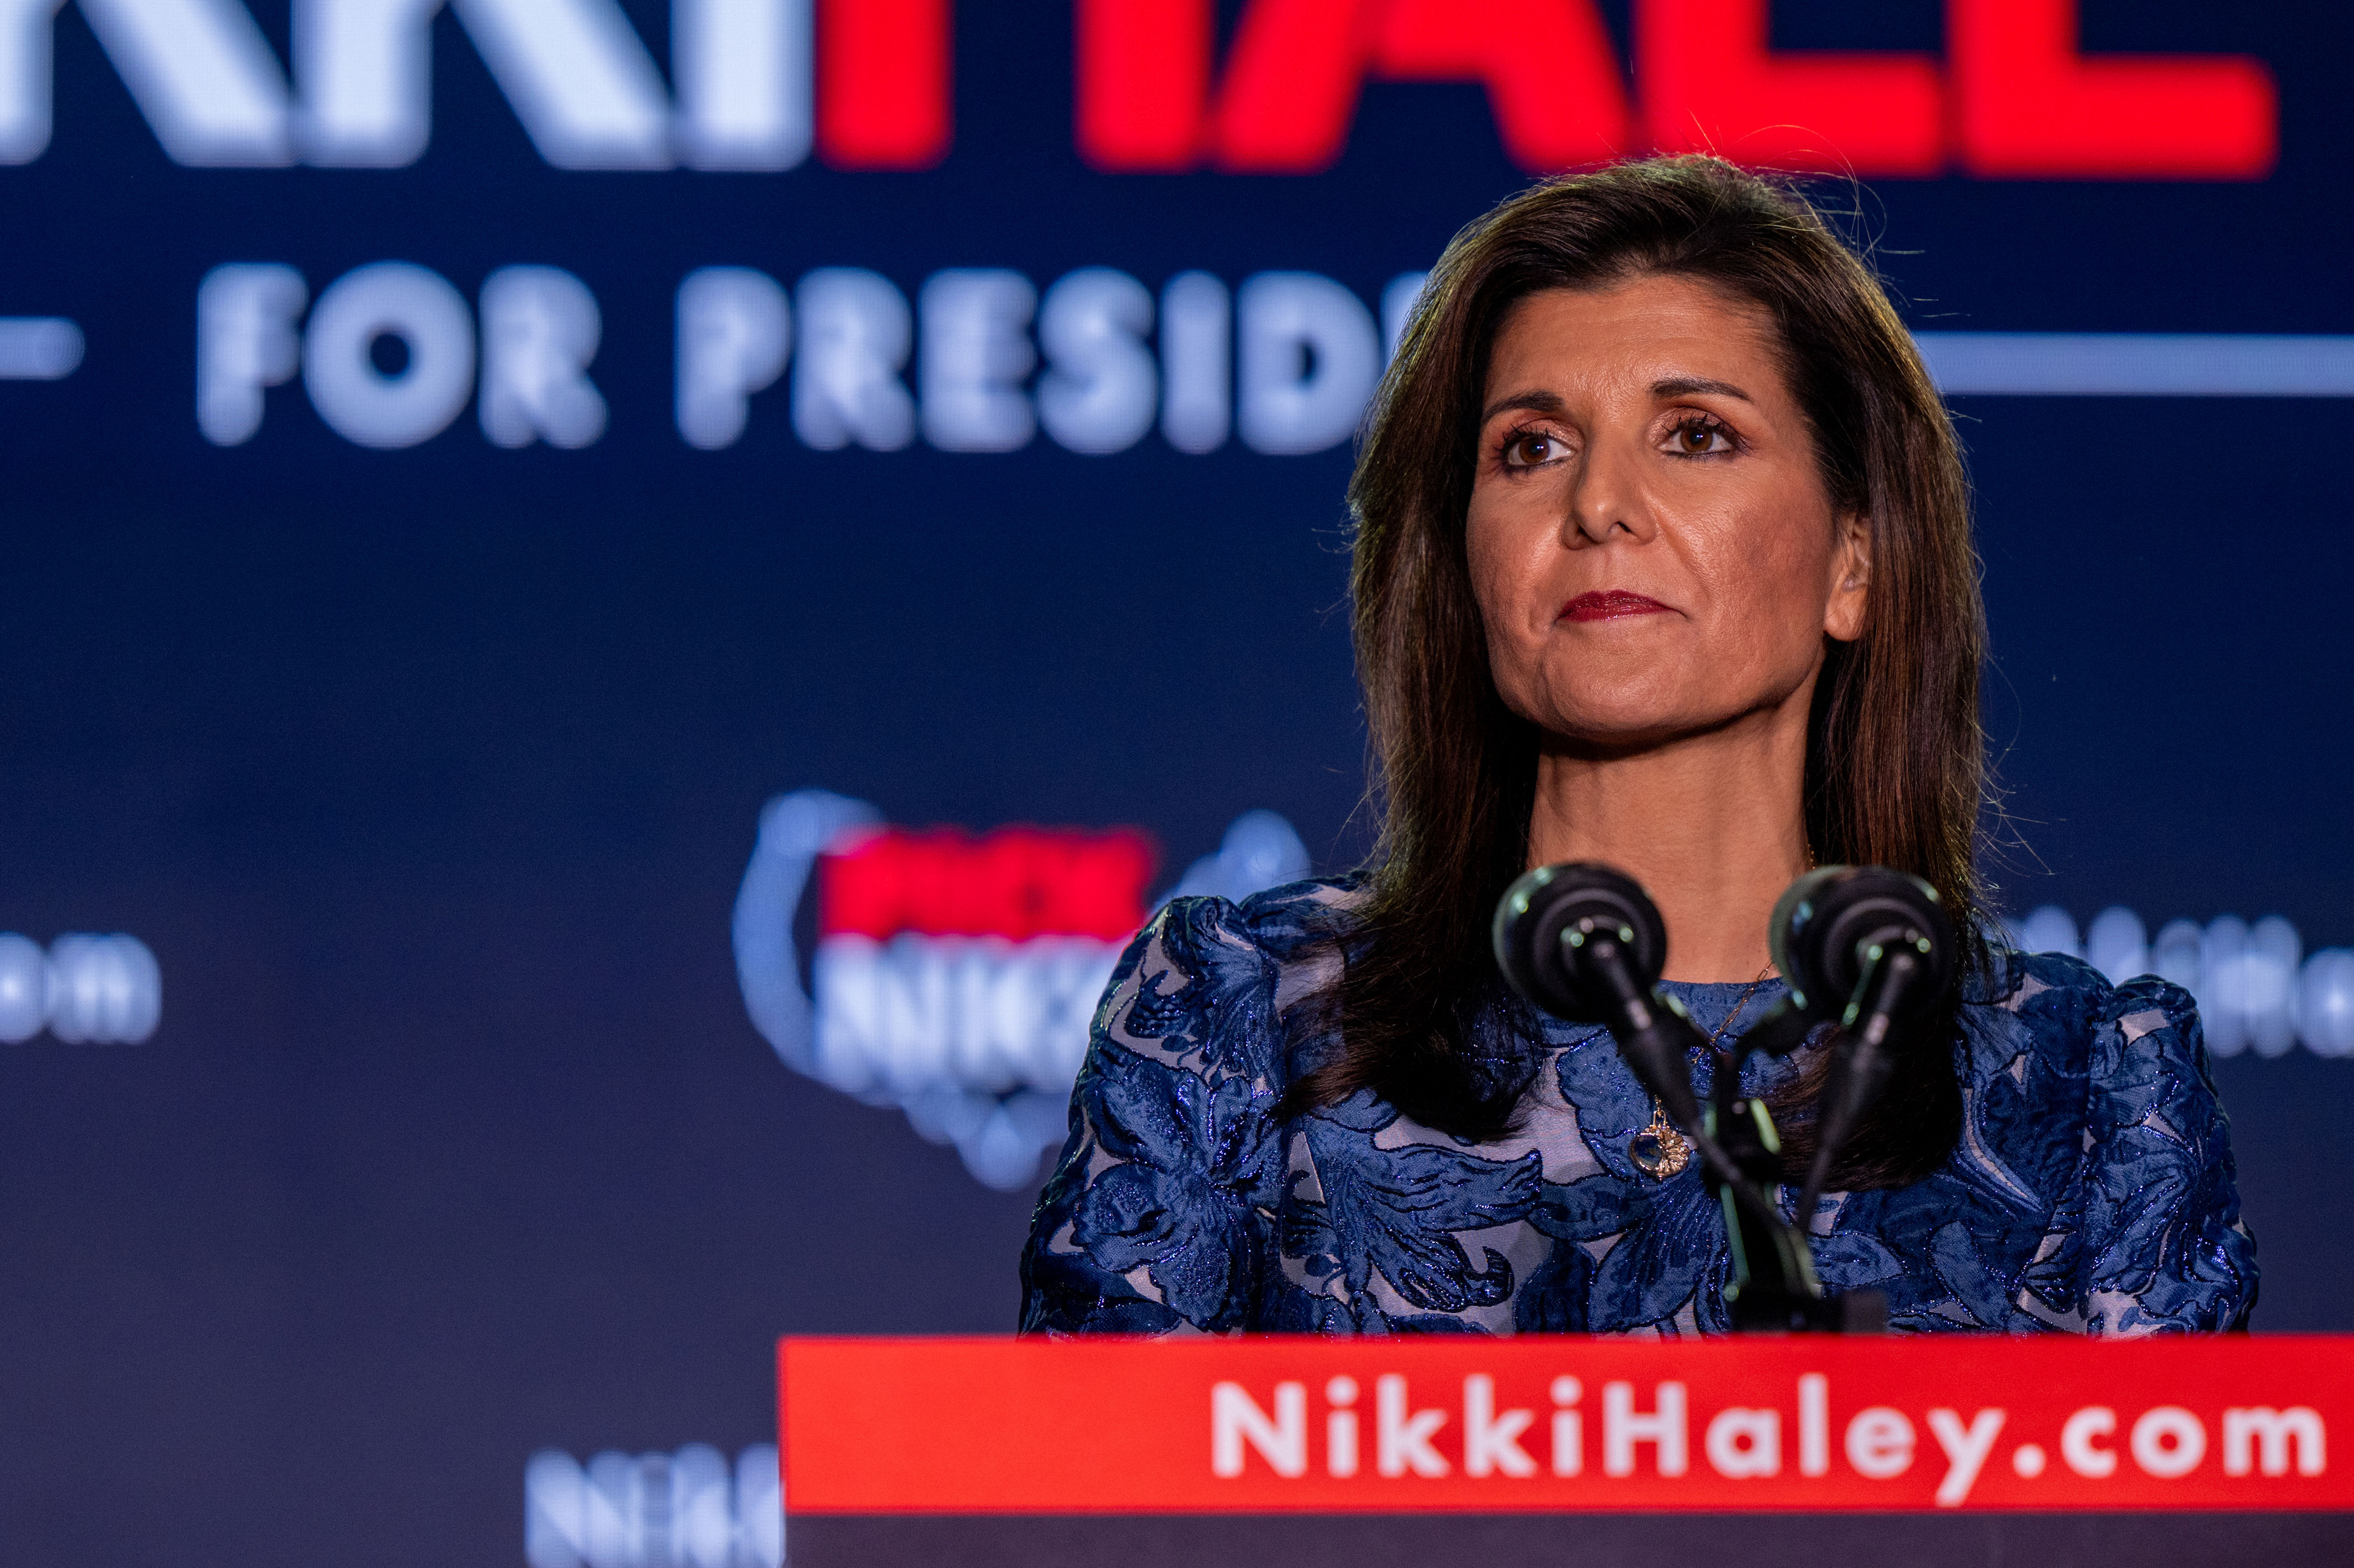 nikki haley vows to stay in race but trump looks unstoppable